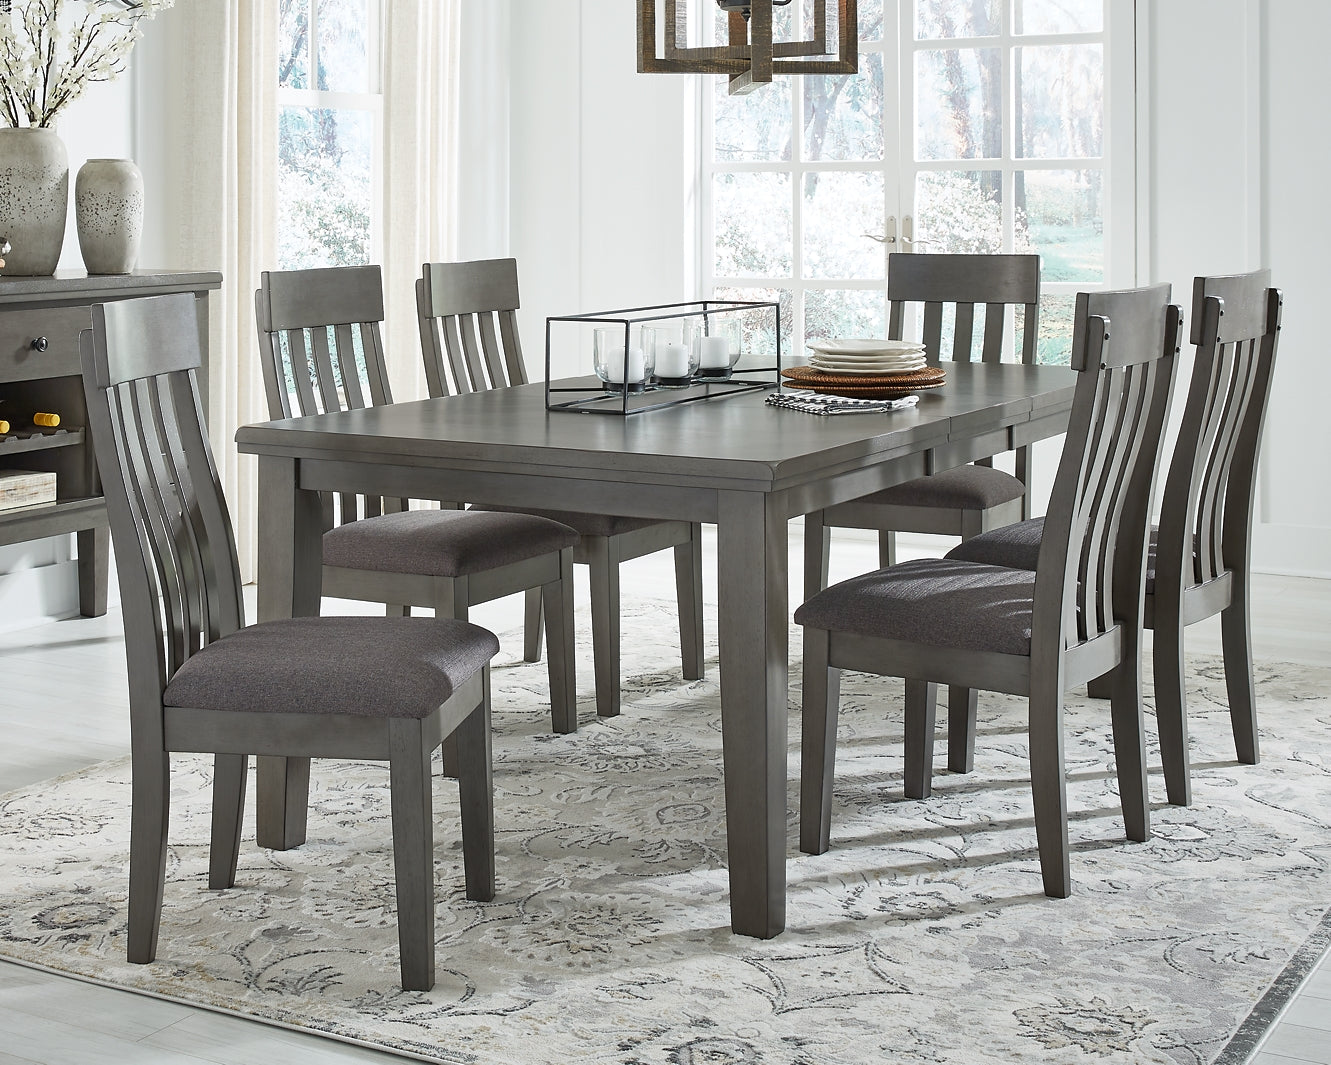 Hallanden Dining Table and 6 Chairs Signature Design by Ashley®